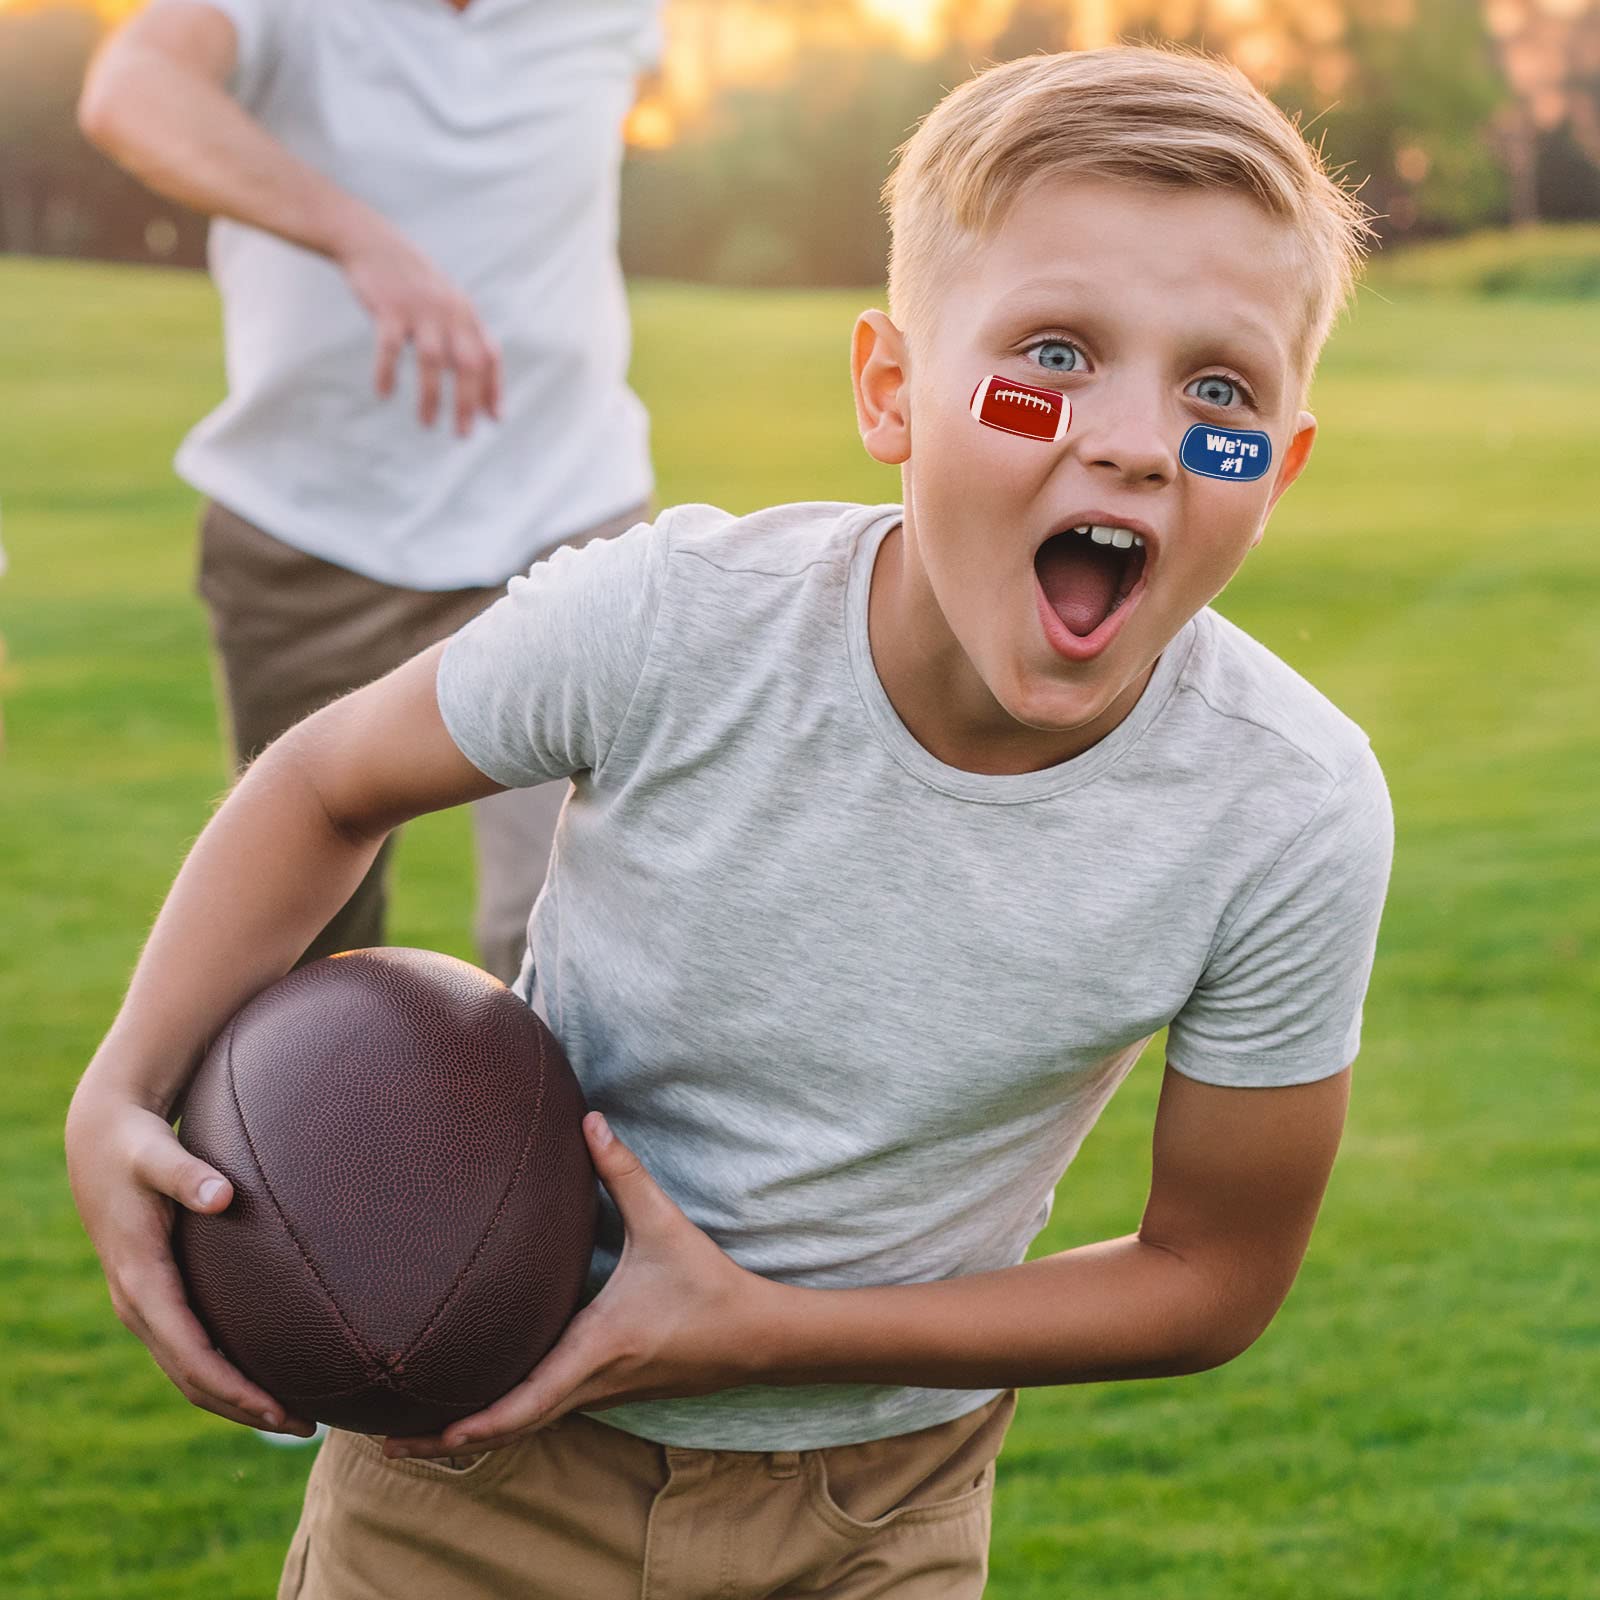 15 Sheets Football Temporary Stickers Kids Football Face Stickers Football Under Eye Sticker Face Paint for Football Game Party Decoration Favor Supplies